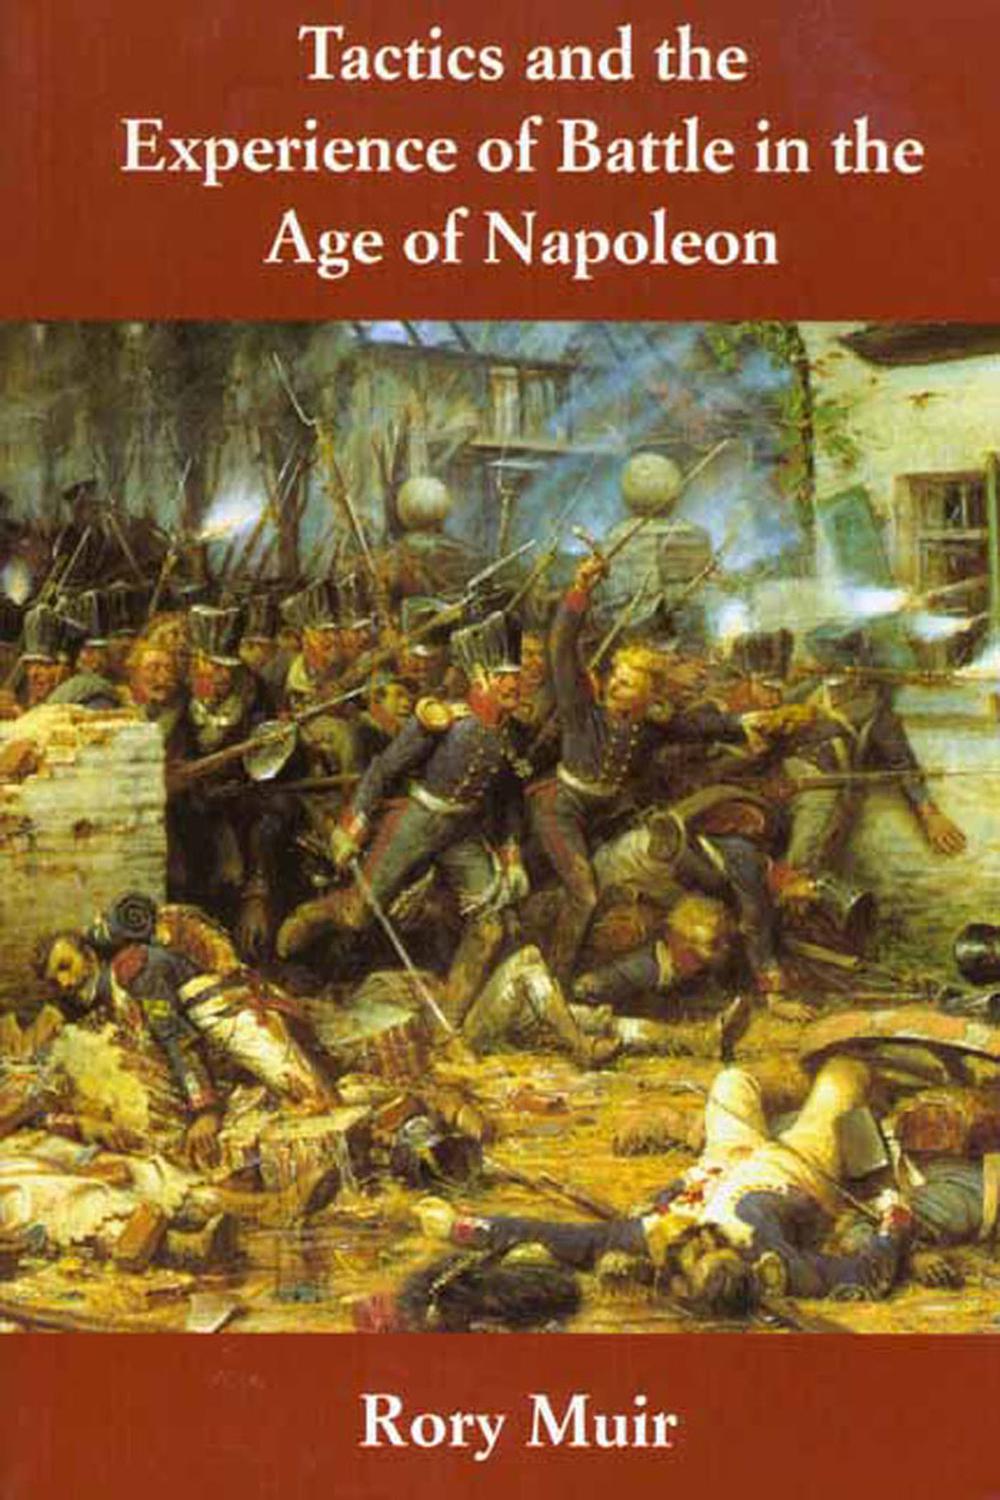 Tactics and the Experience of Battle in the Age of Napoleon - Rory Muir